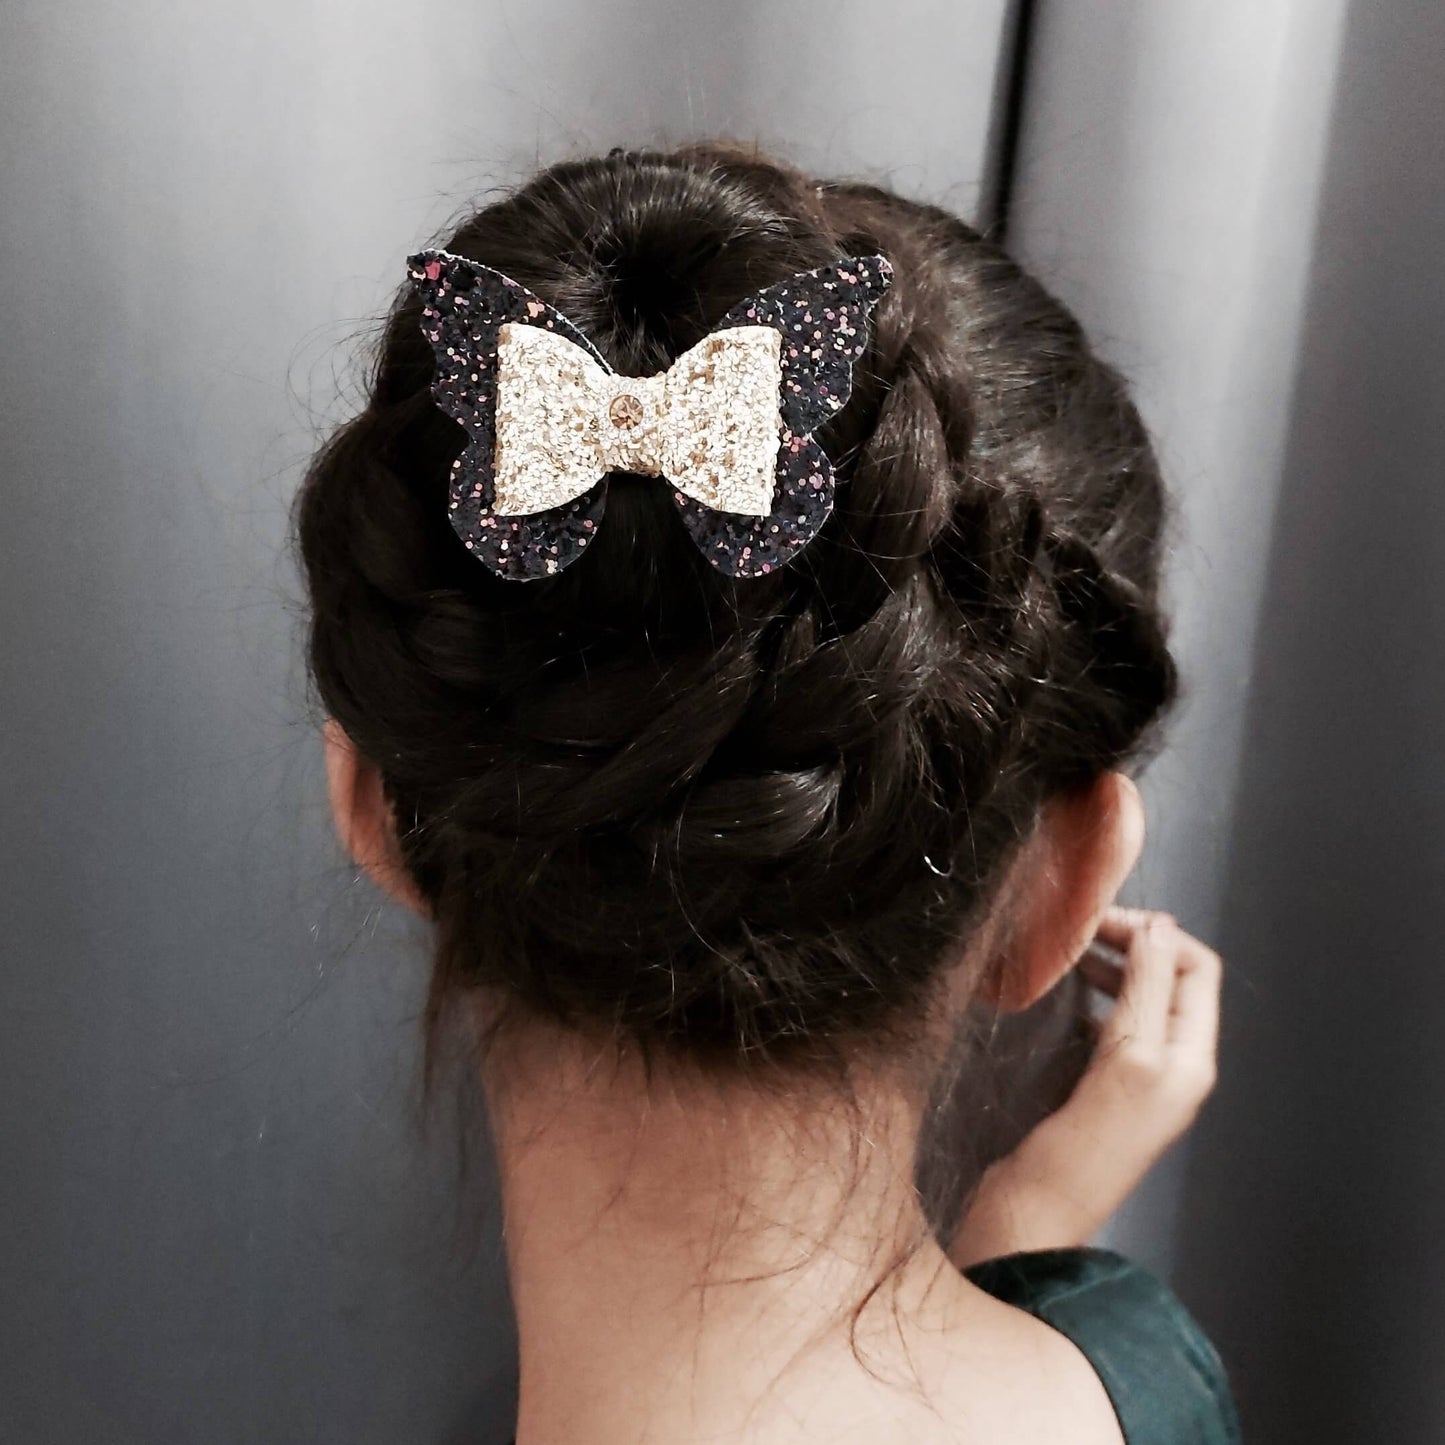 Black & Gold Butterfly Bow Hair Clip |  Designer Hair Accessory for Kids and Girls